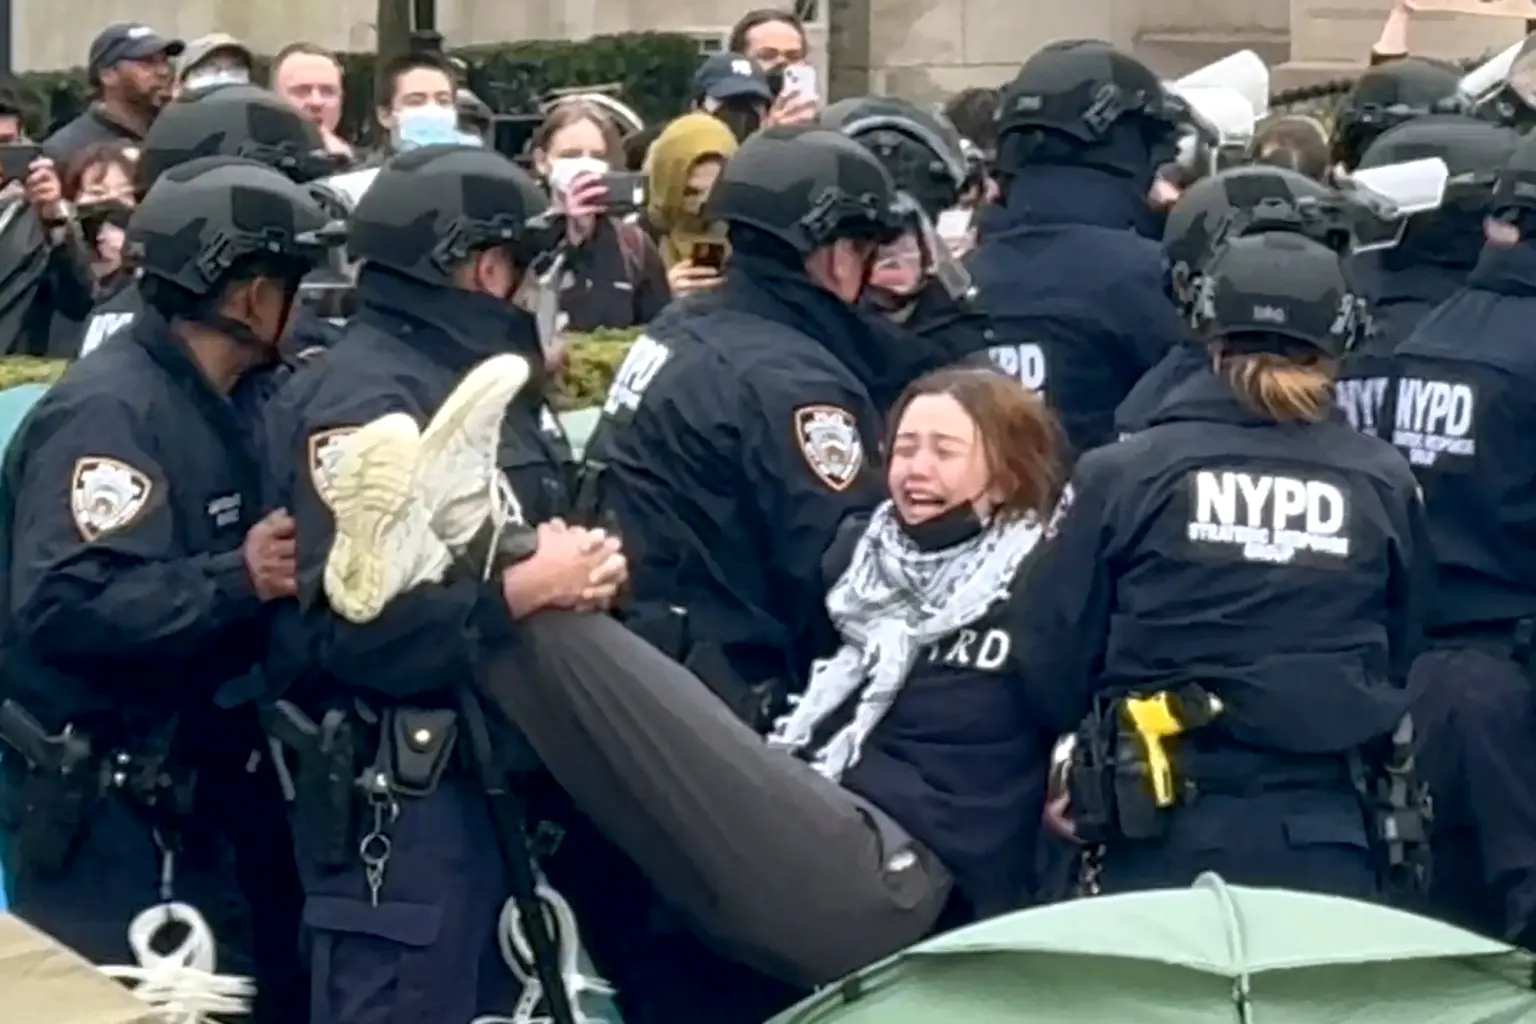 Cops Storm Columbia, Bust 100 Anti-Israel Protesters After University Prez Finally Tells NYPD To Clear Campus